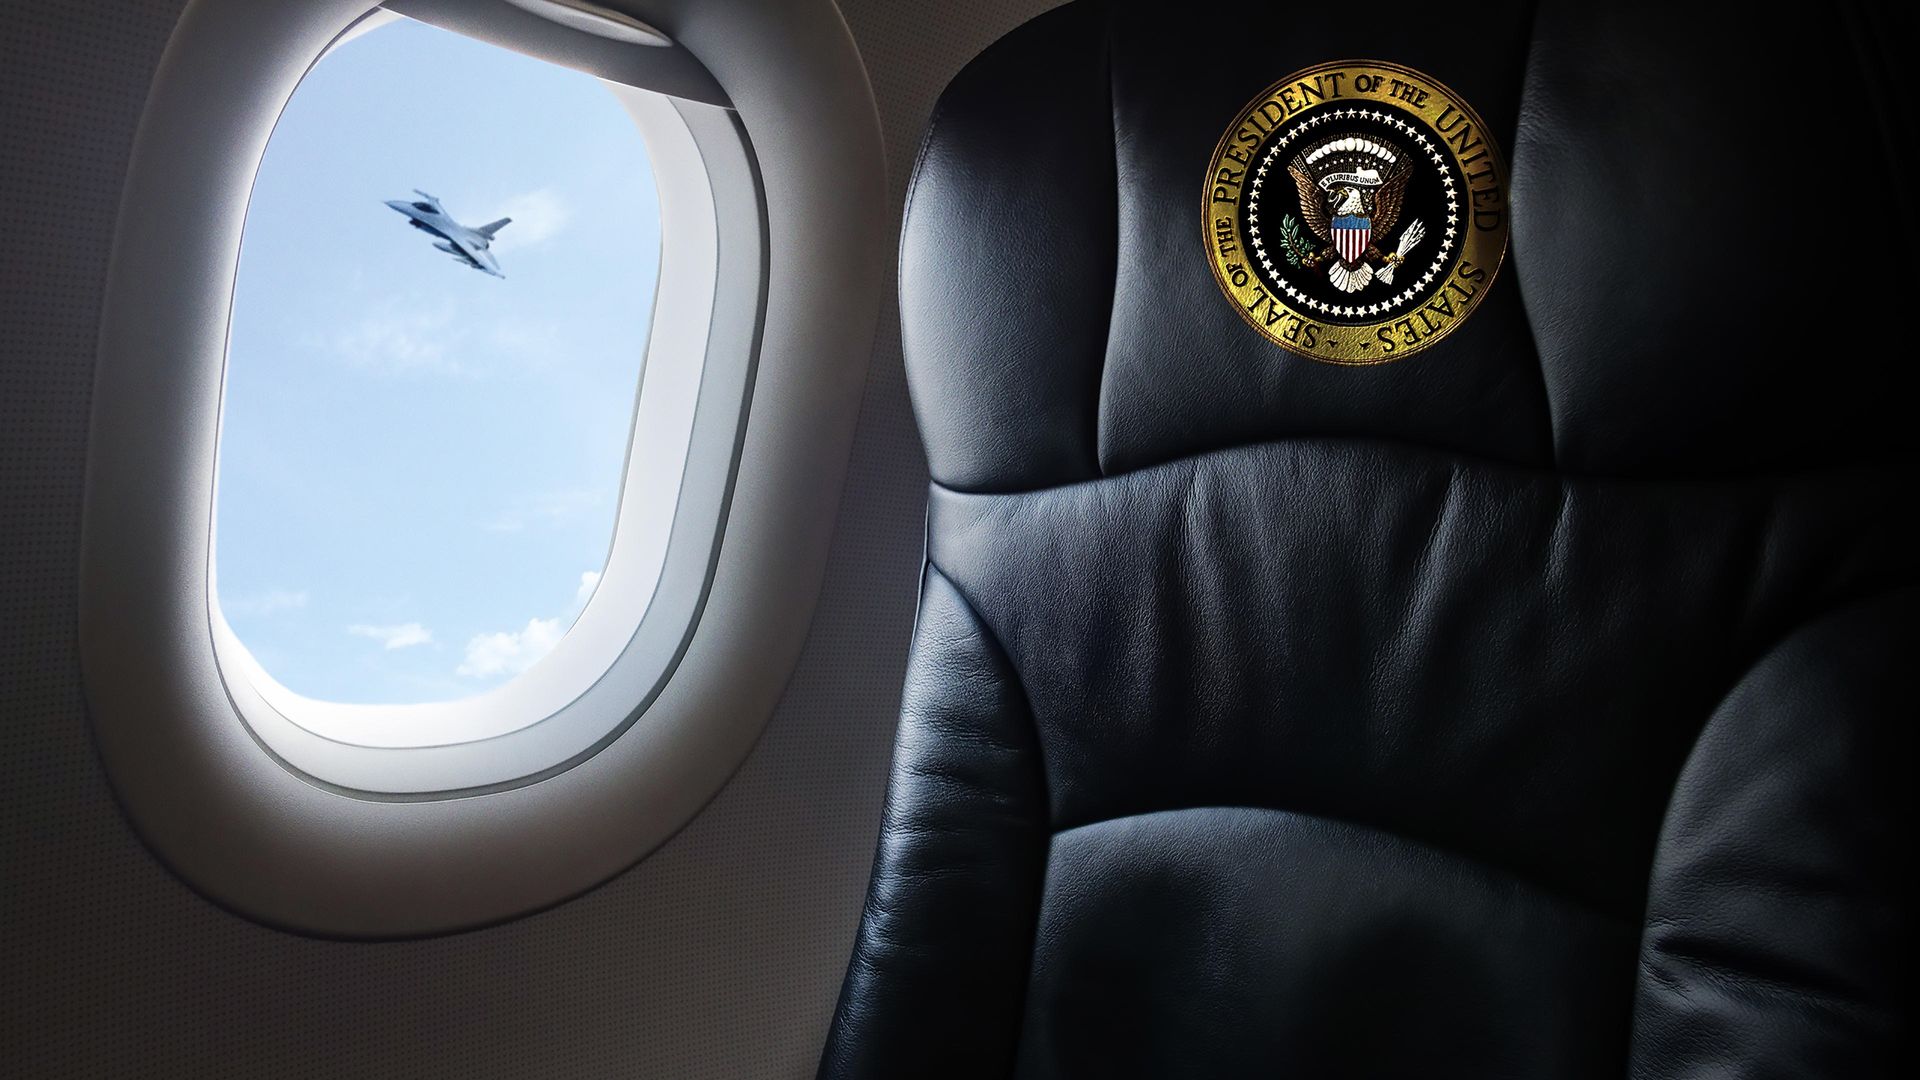 9/11: Inside Air Force One Backdrop